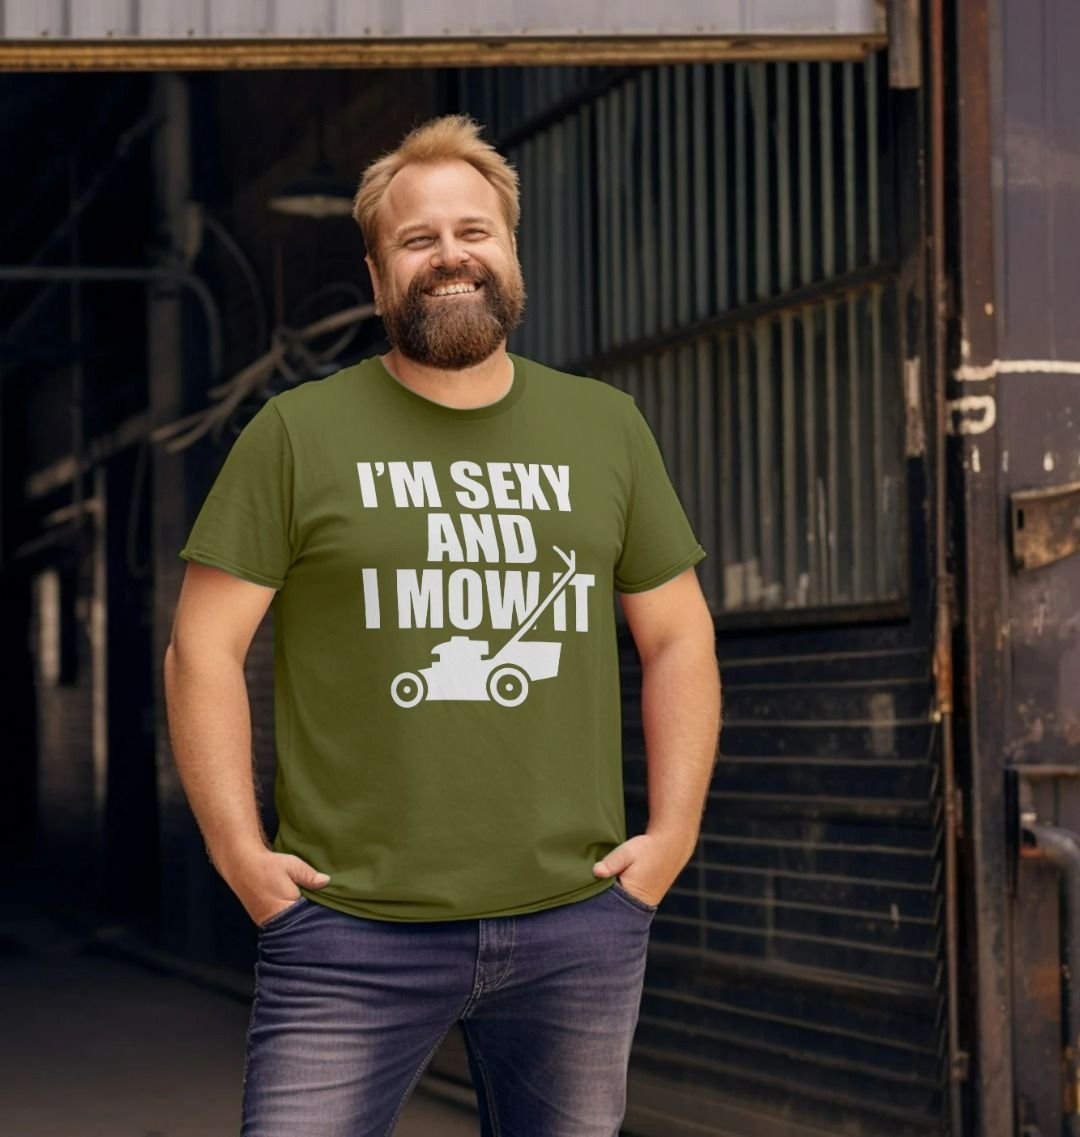 I'm Sexy And I Mow It T Shirt